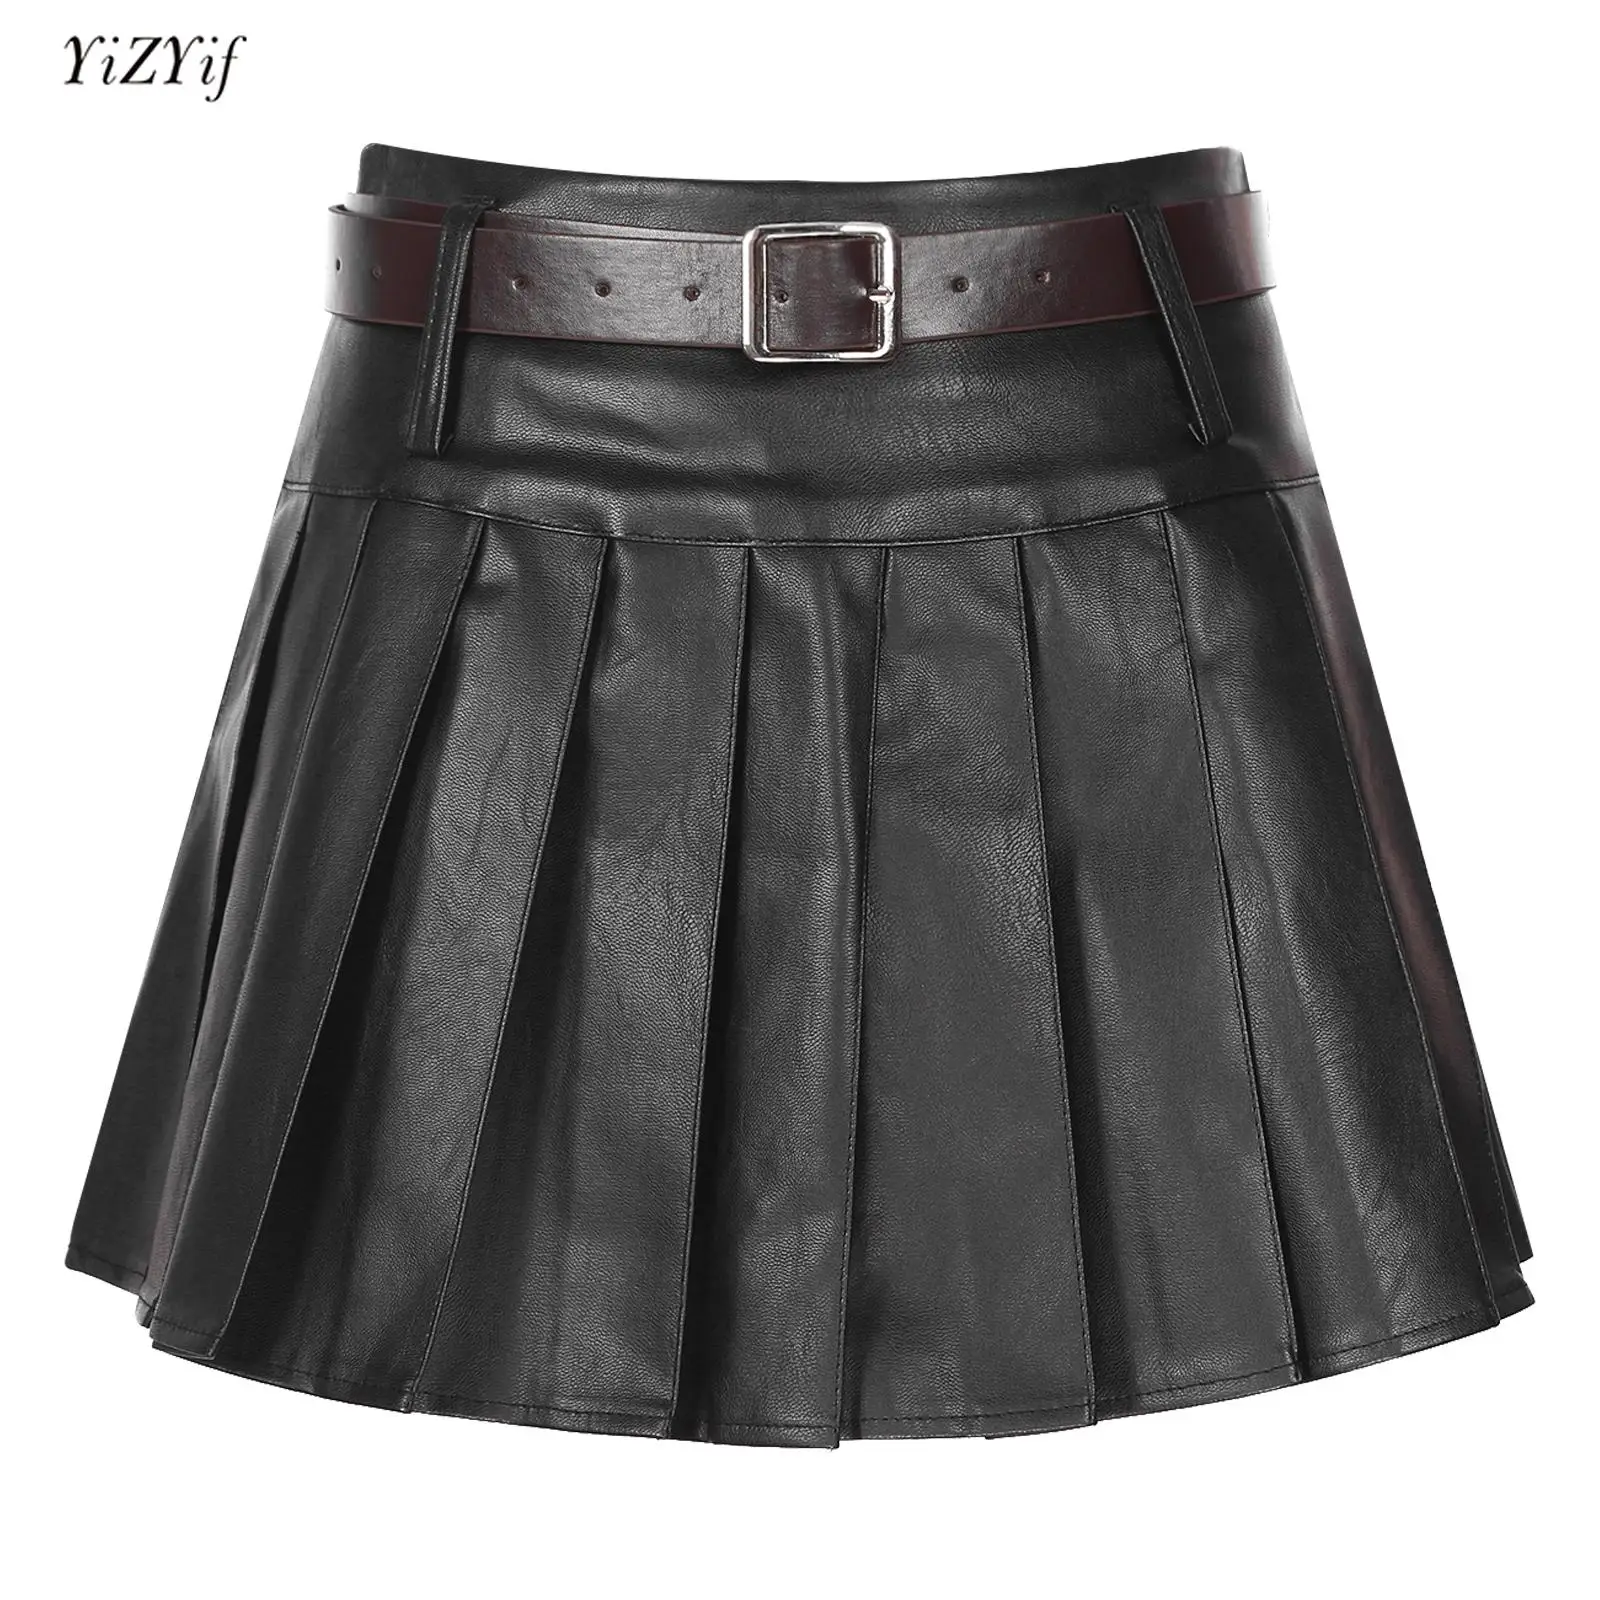 Womens Faux Leather Pleated Skirt Fashion Clubwear High Waist Built-in Shorts Skirts with Adjustable Belt Party Street Dancewear